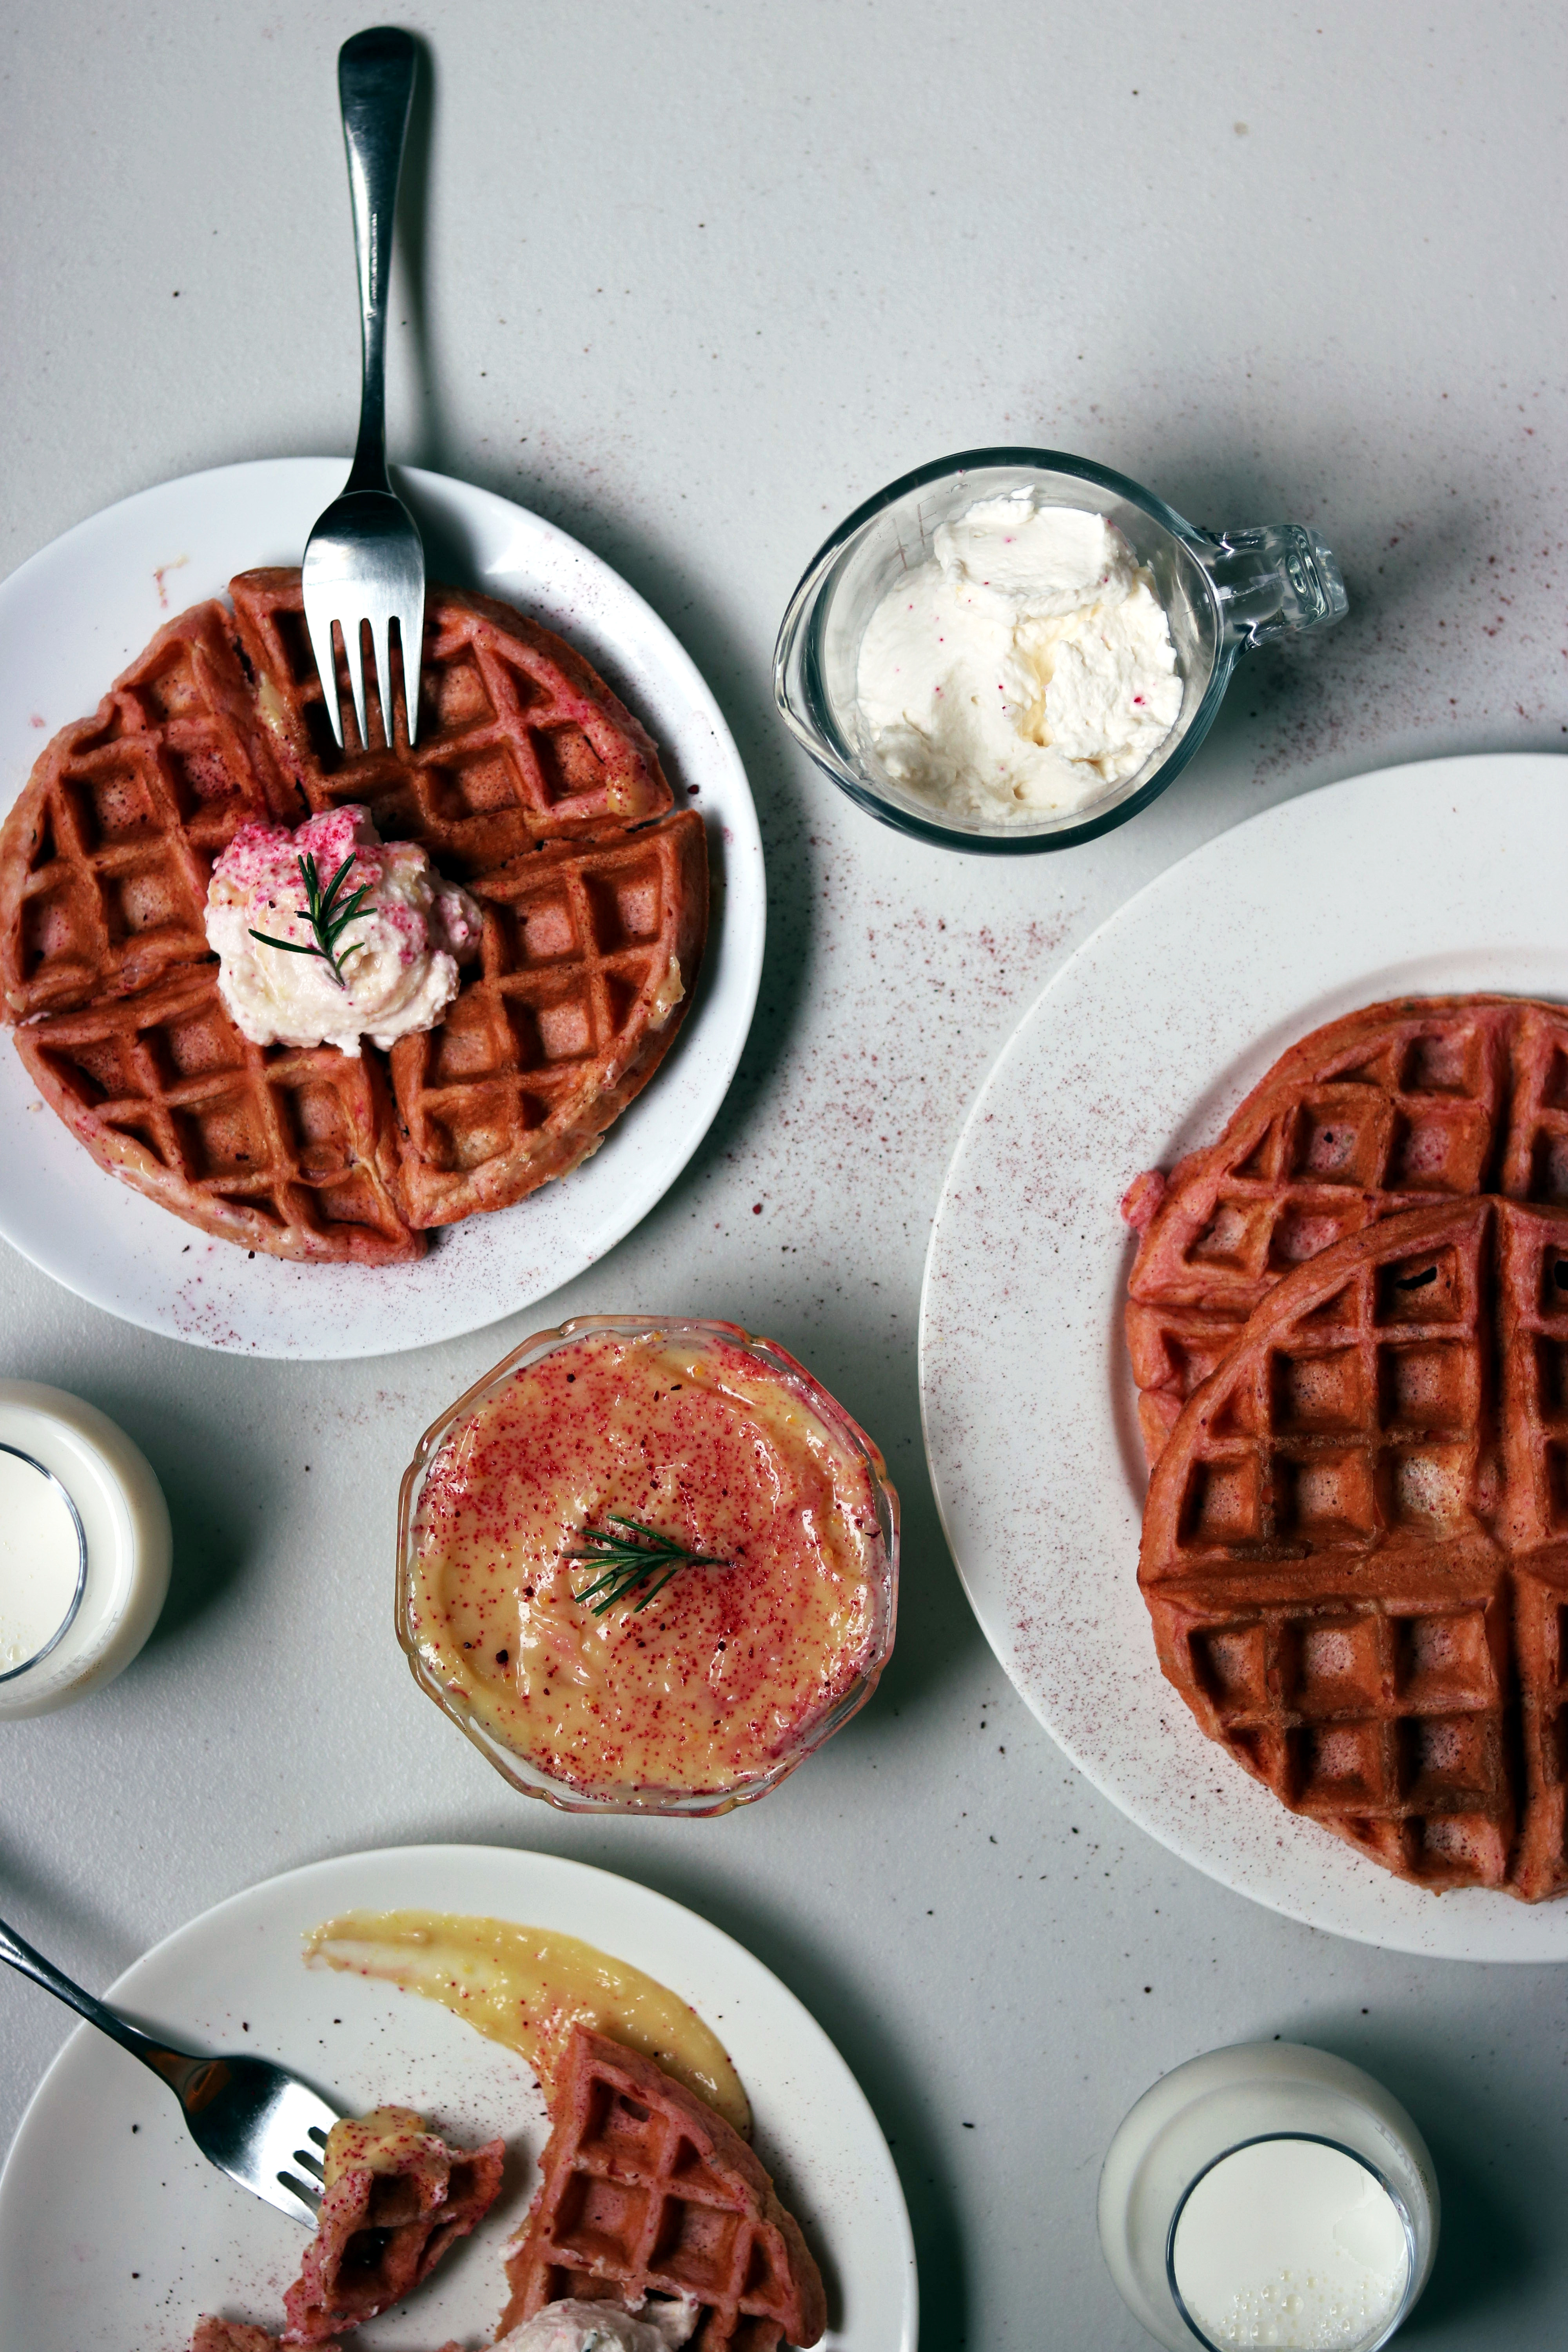 These pink rosemary and lemon Belgian waffles are the perfect way to say I love you for Valentine's day or for any time you are hosting brunch! They sound so gourmet and fancy, but they are a piece of cake (er waffle?) to make! The tart lemon curd and delicate woodiness of the rosemary will have your guests so impressed! And I have a little trick for you that will guarantee the fluffiest waffles time and time again. It takes hardly any extra time and will elevate your waffles from diner to gourmet. Valentine's Day Recipes | Lemon Curd | Belgian Waffle Recipes | Brunch Recipes